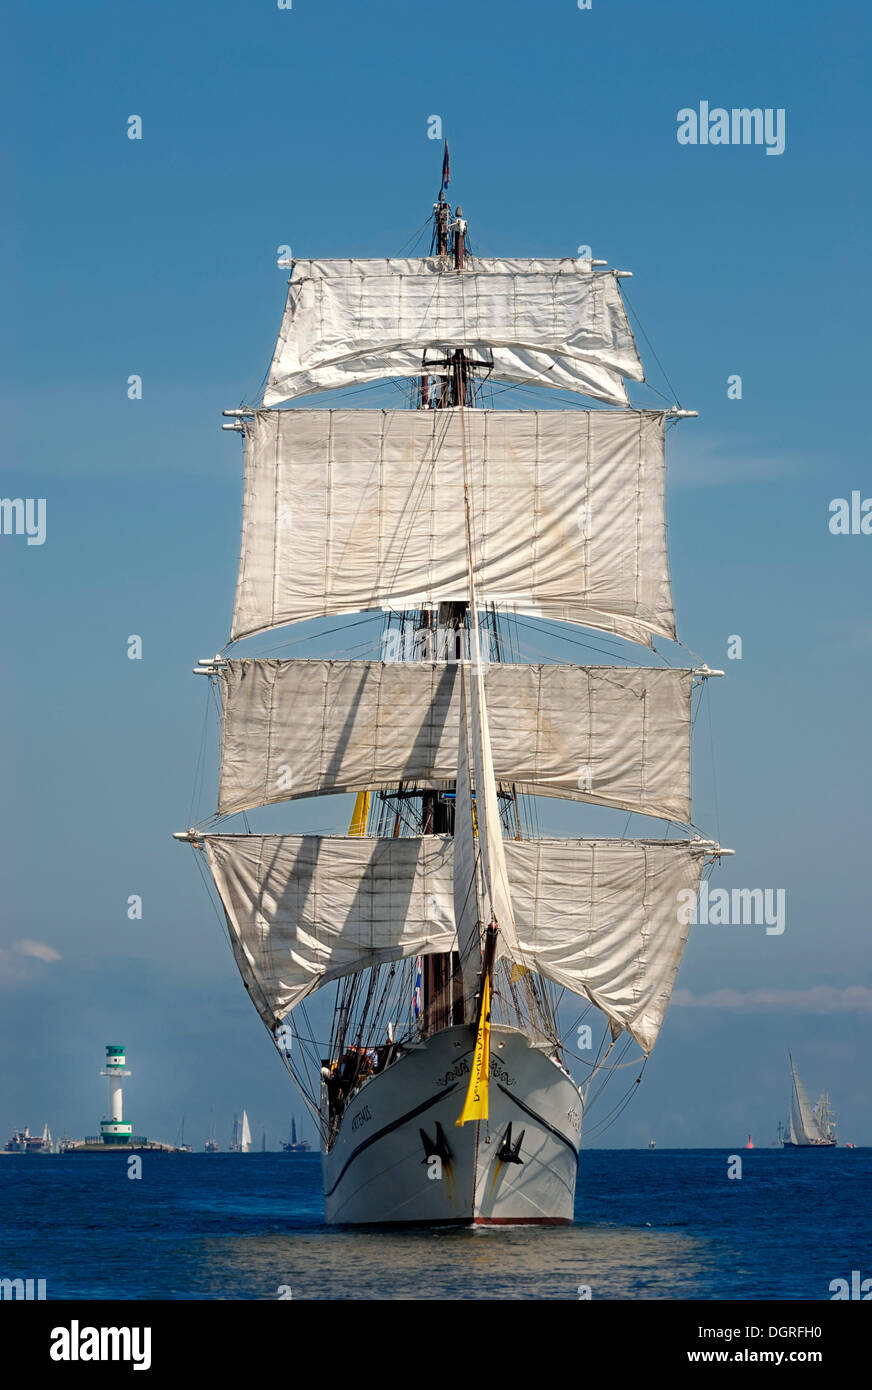 Fully rigged three-masted barque, traditional sailing, windjammer Arthemis with the Friedrichsort lighthouse in the distance Stock Photo